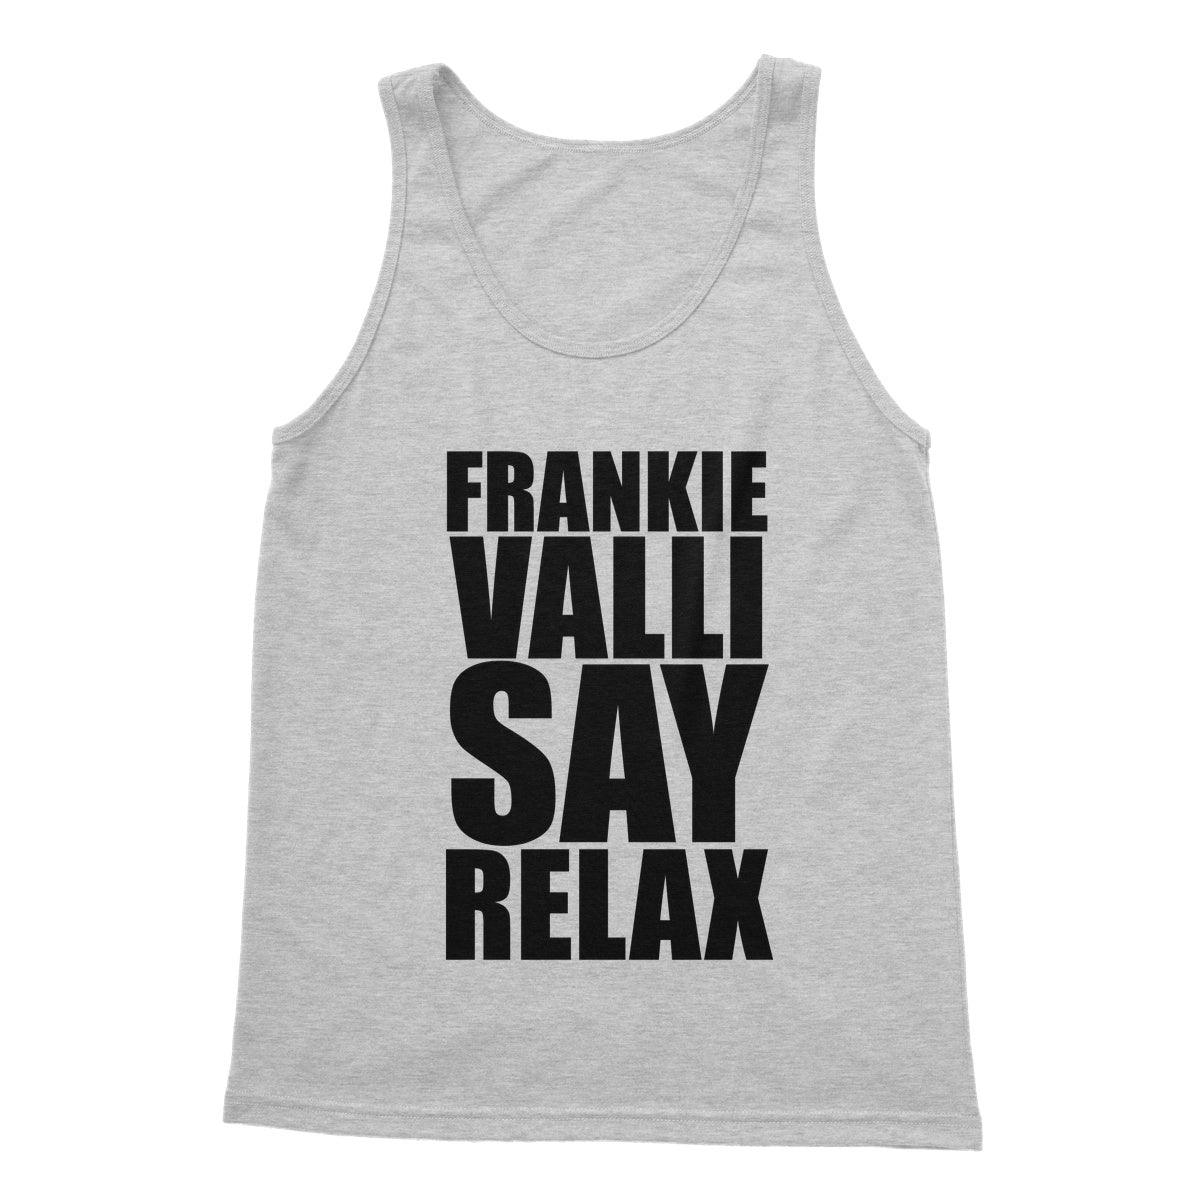 Frankie Valli Say Relax Softstyle Tank Top | Apparel Sports Grey